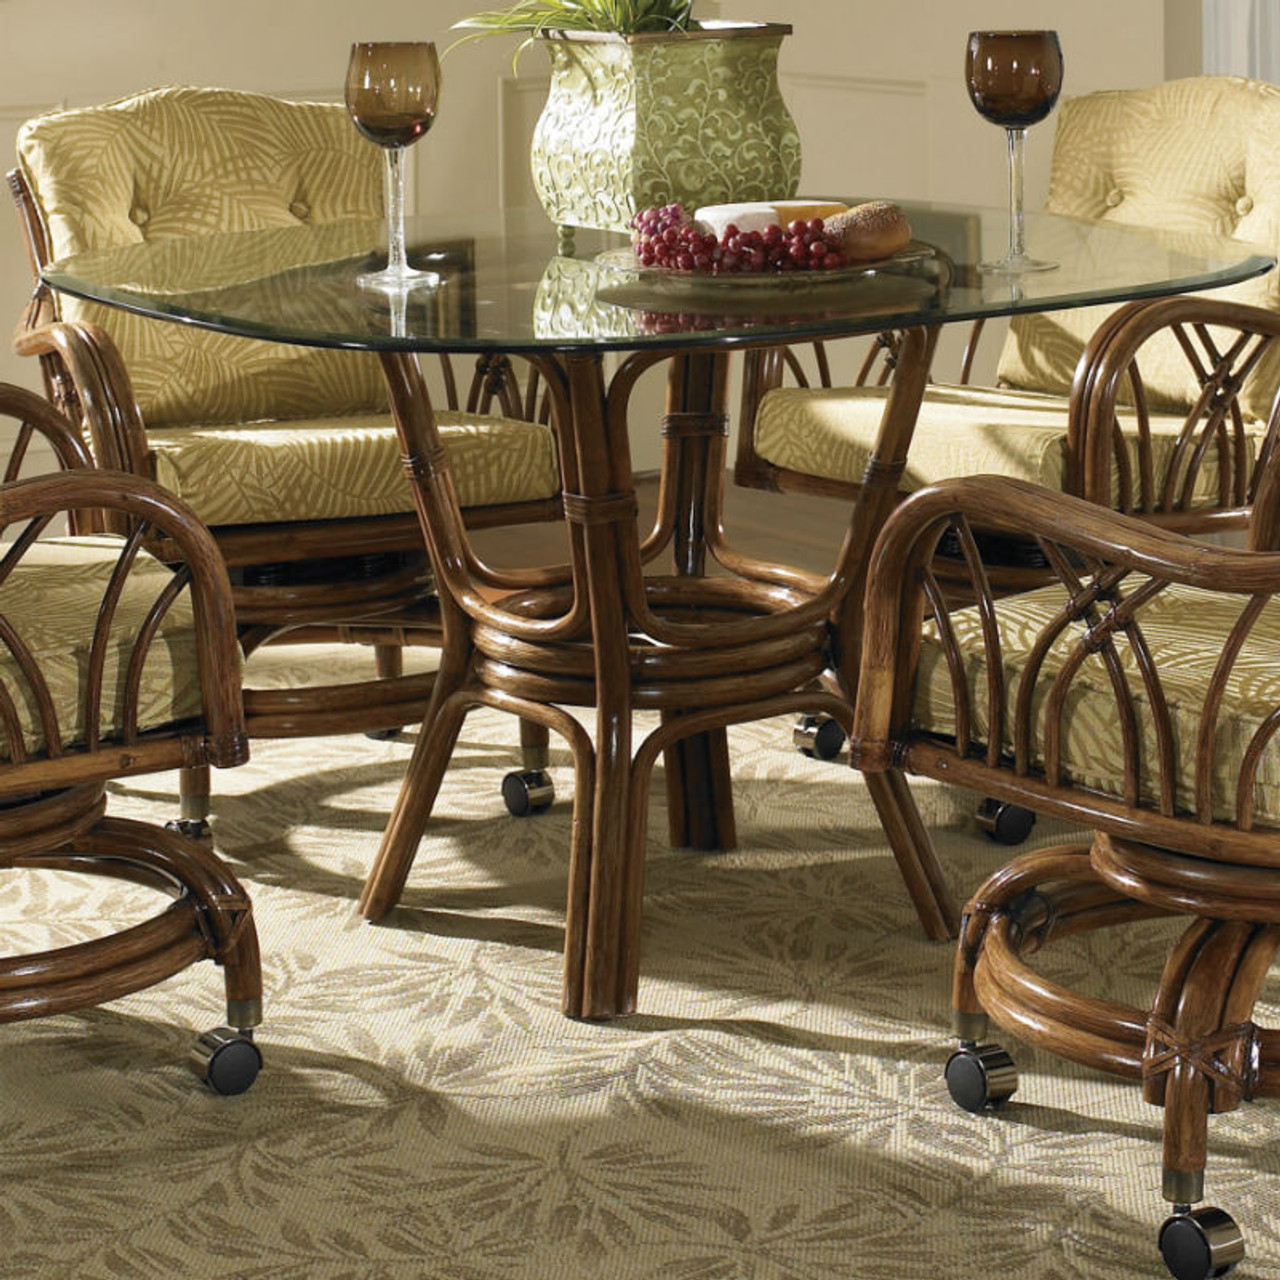 Orchard Park 5 PC Dining Set with Caster Dining Chairs